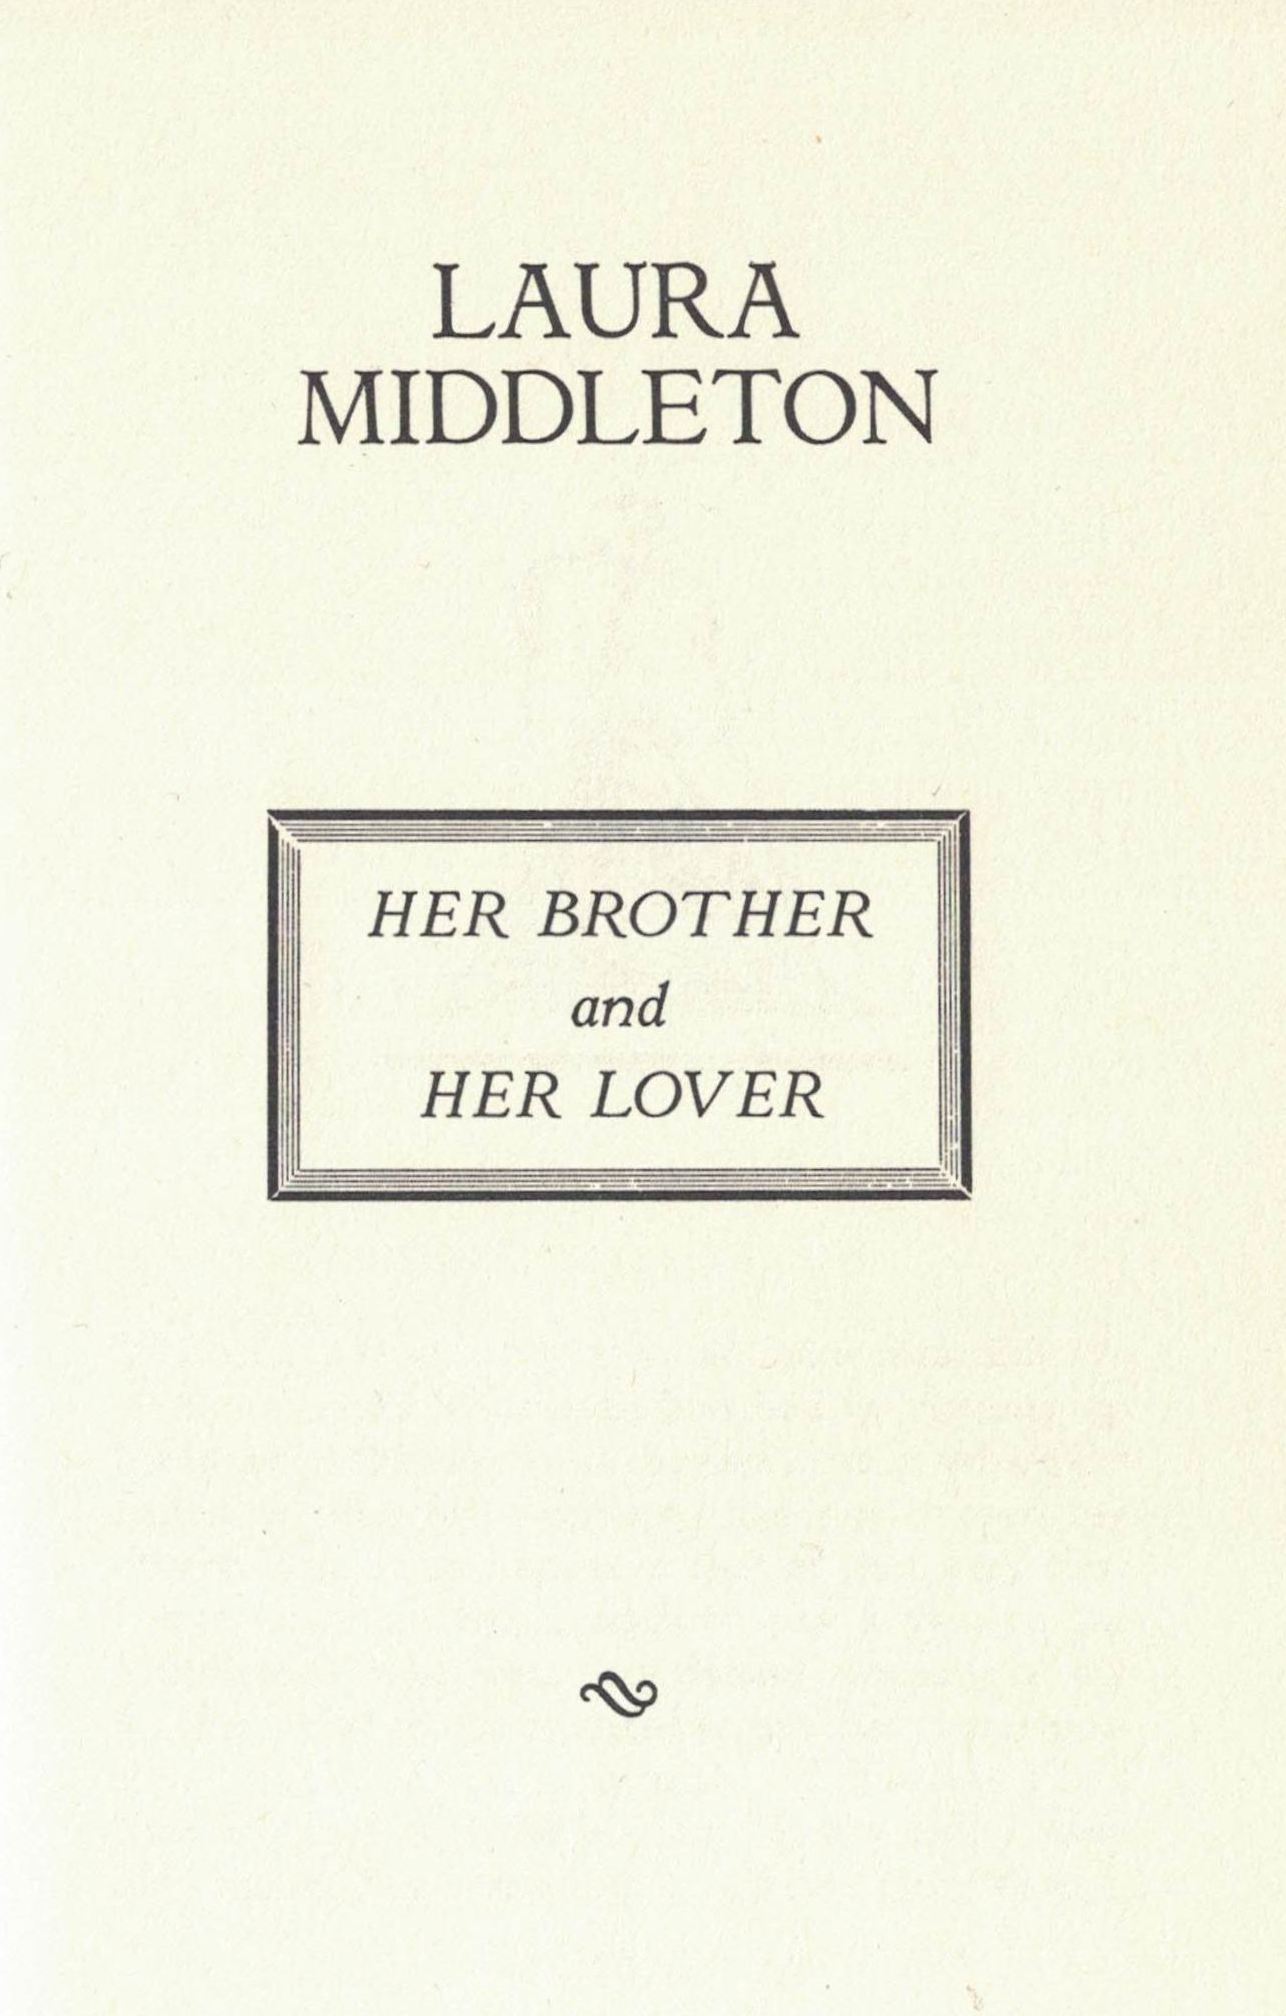 Anon. Laura Middleton. Title page